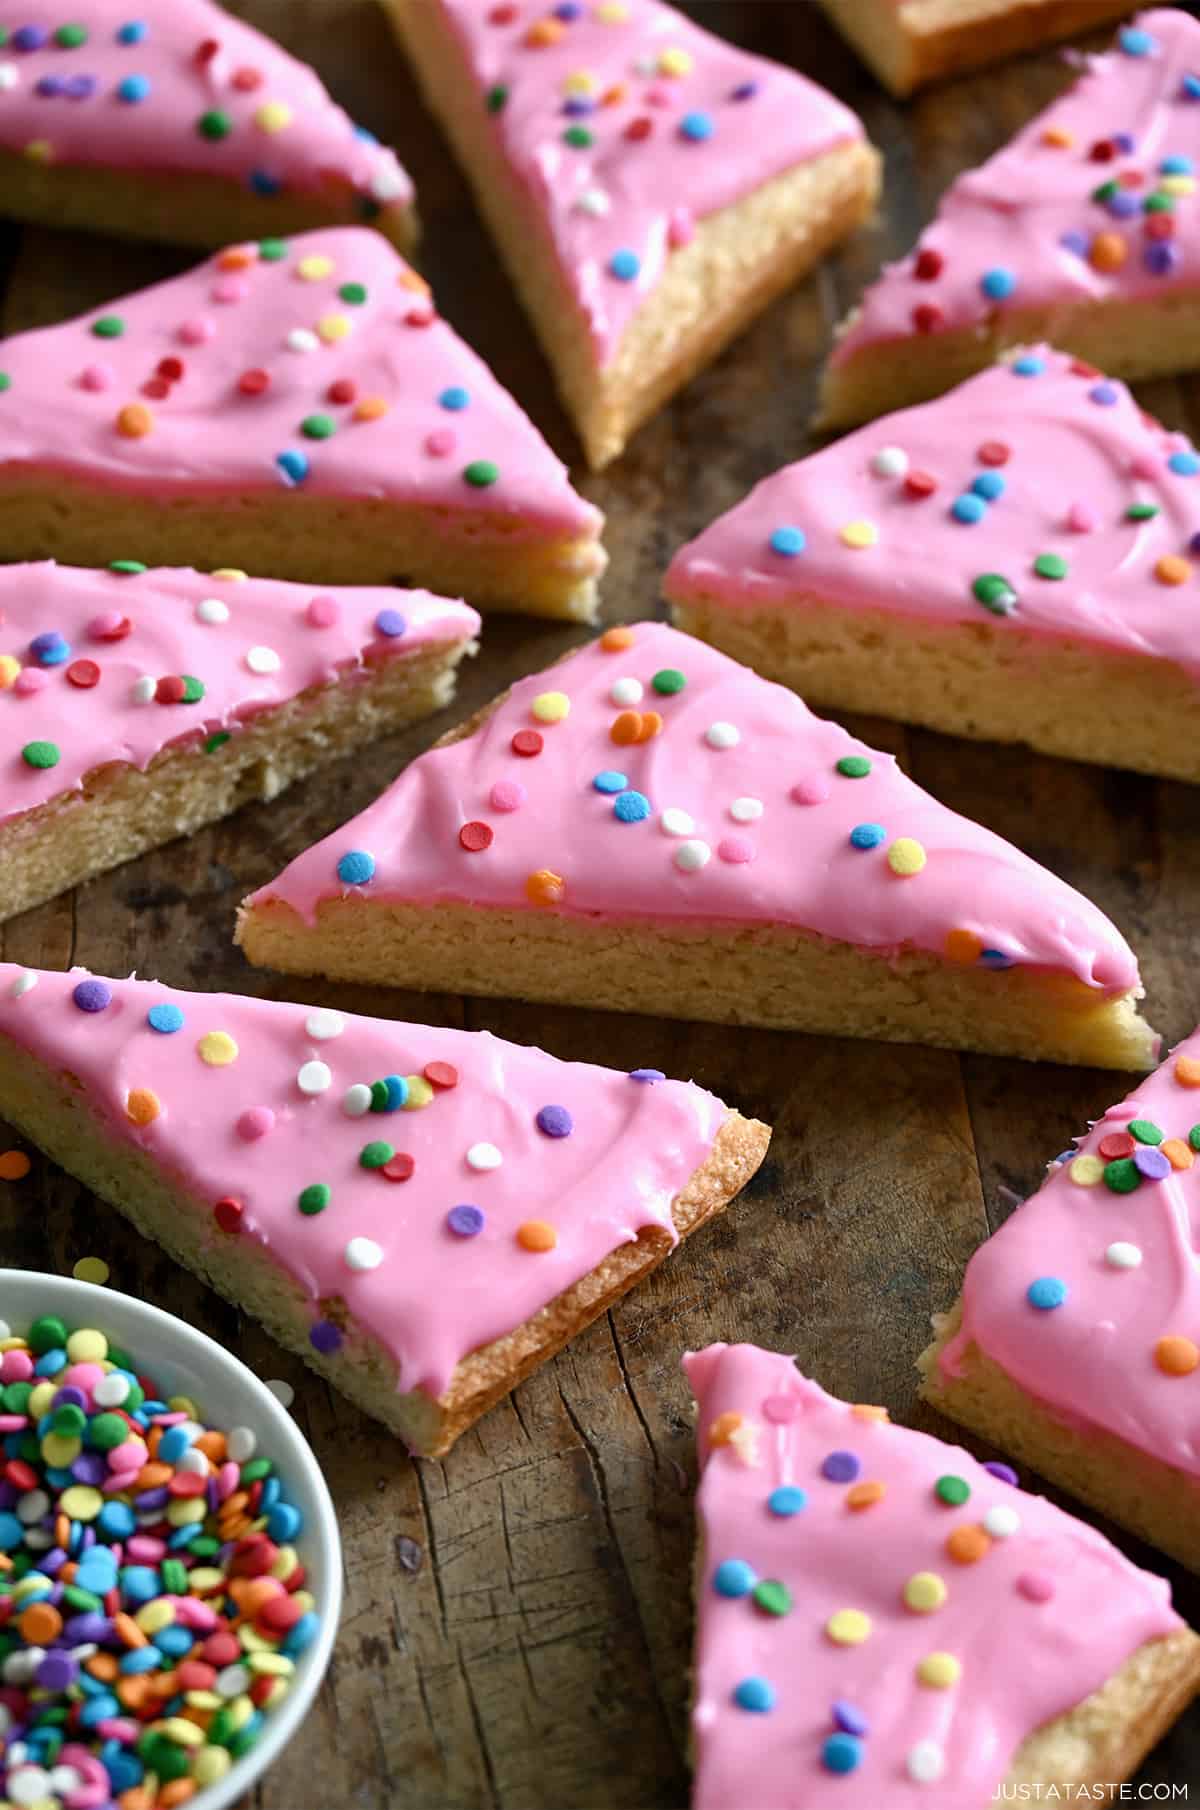 Sugar cookie bars with pink frosting and sprinkles on a wooden surface next to a small bowl containing rainbow sprinkles.